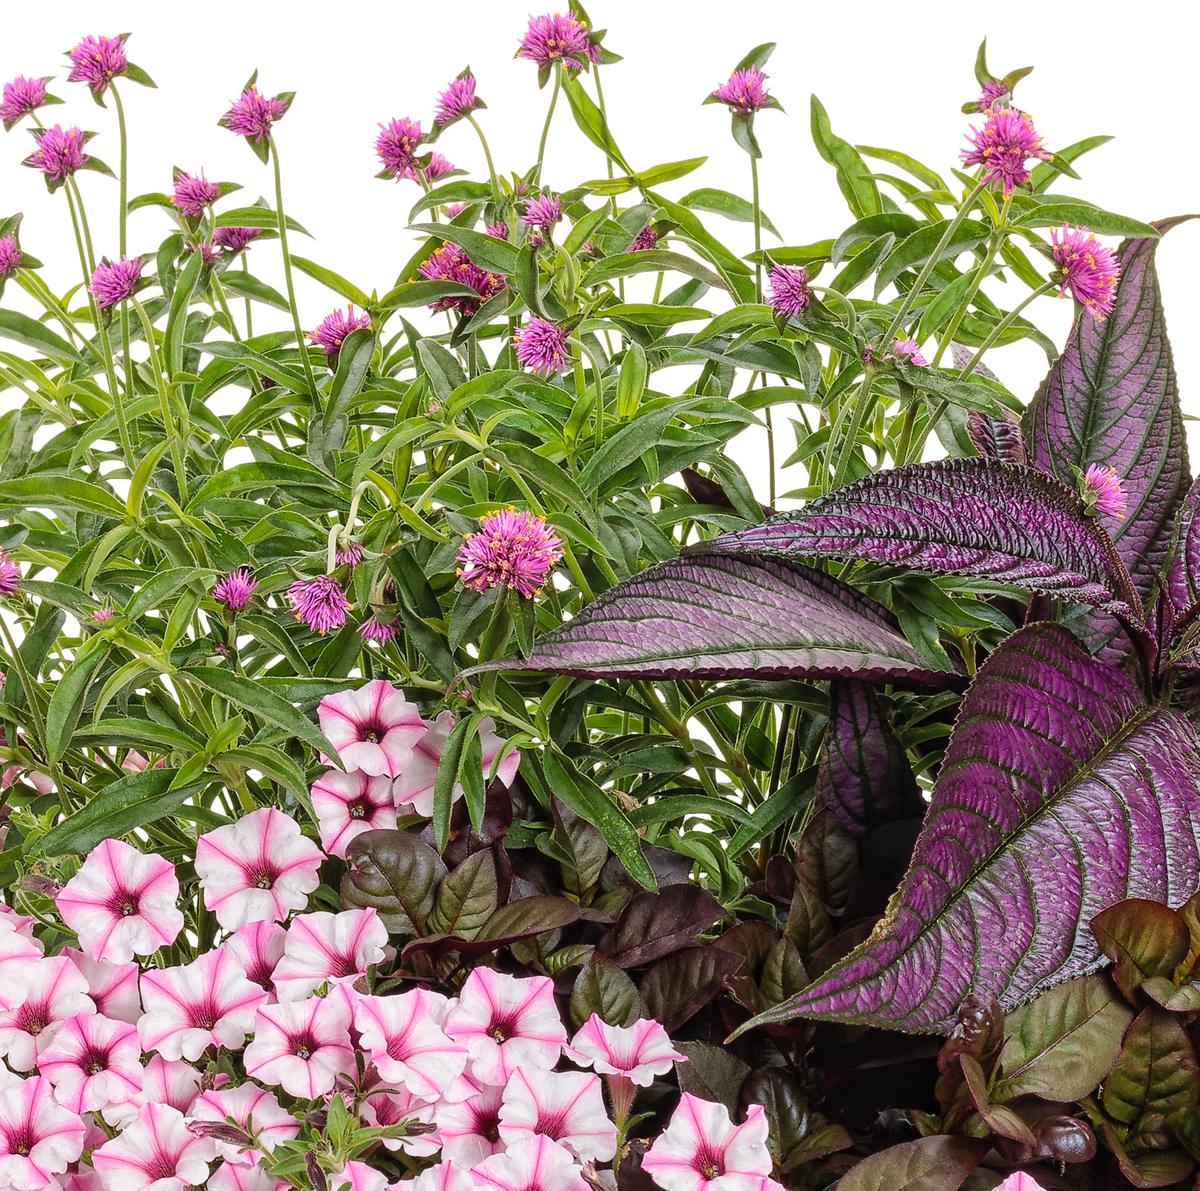 ‘This is the Life’ is a recipe that features Truffula Pink gomphrena, Supertunia Mini Vista Pink Star, and Plum Dandy alternanthera along with Persian Shield. (Provided photo by Chris Brown Photography/TNS)